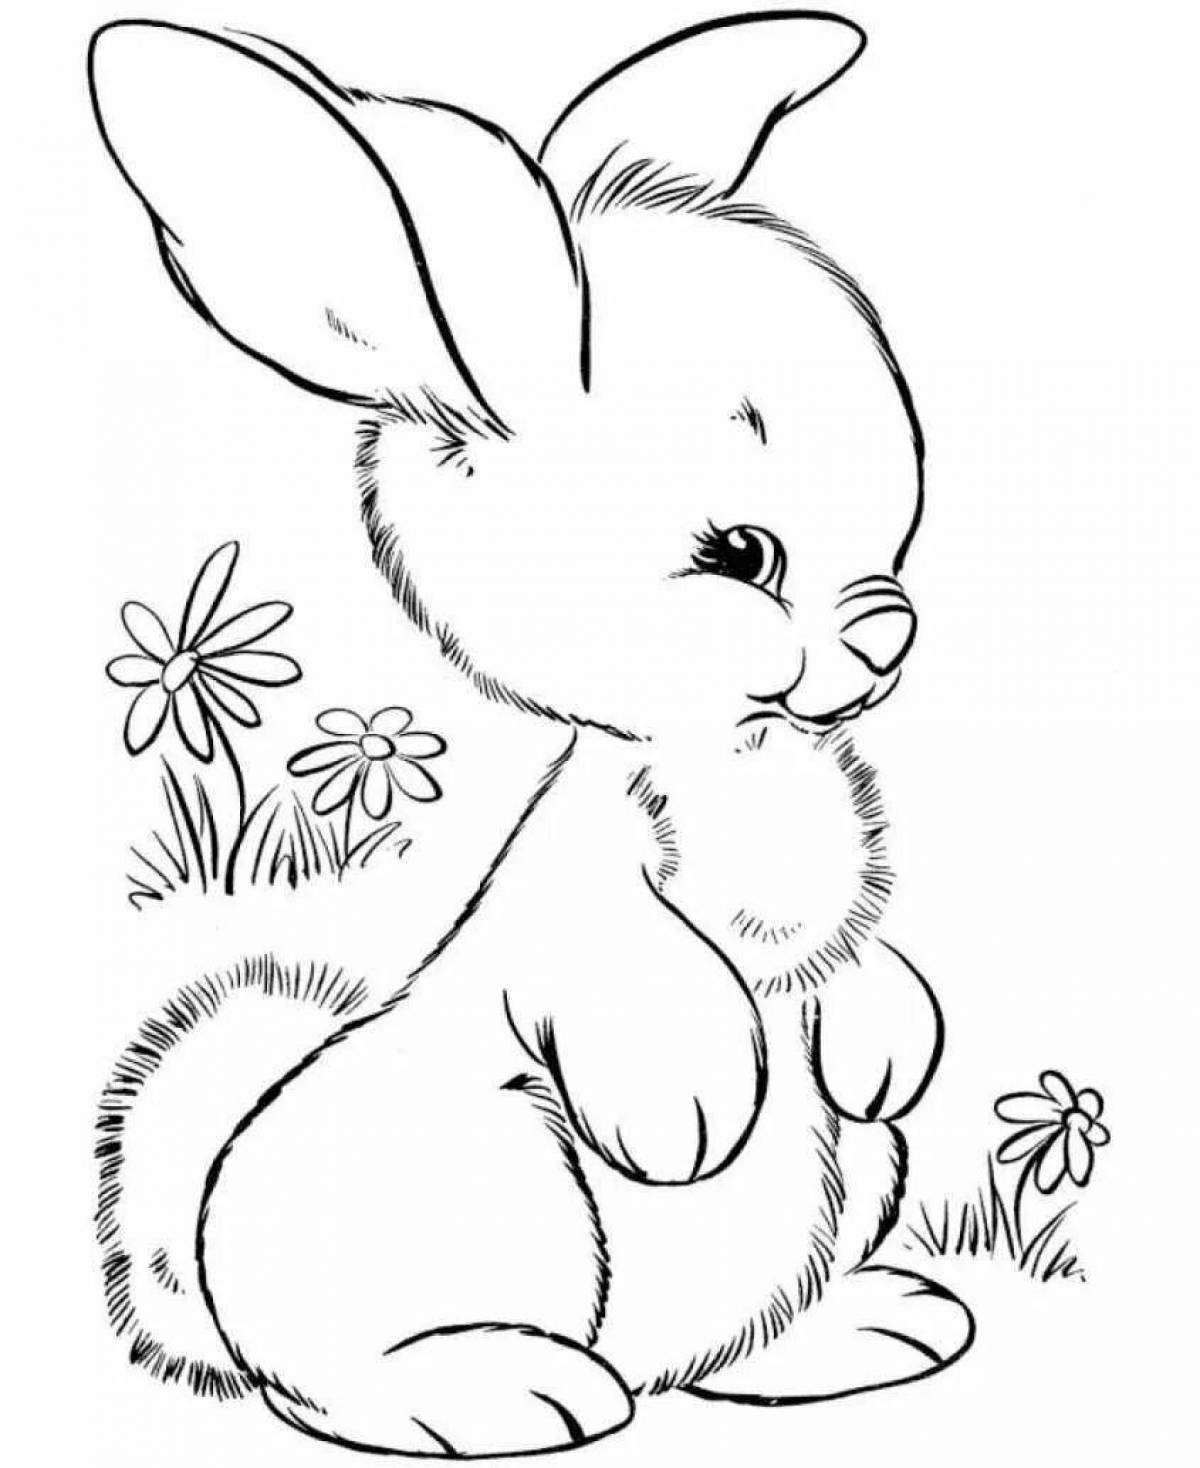 Surprised bunny coloring book for kids